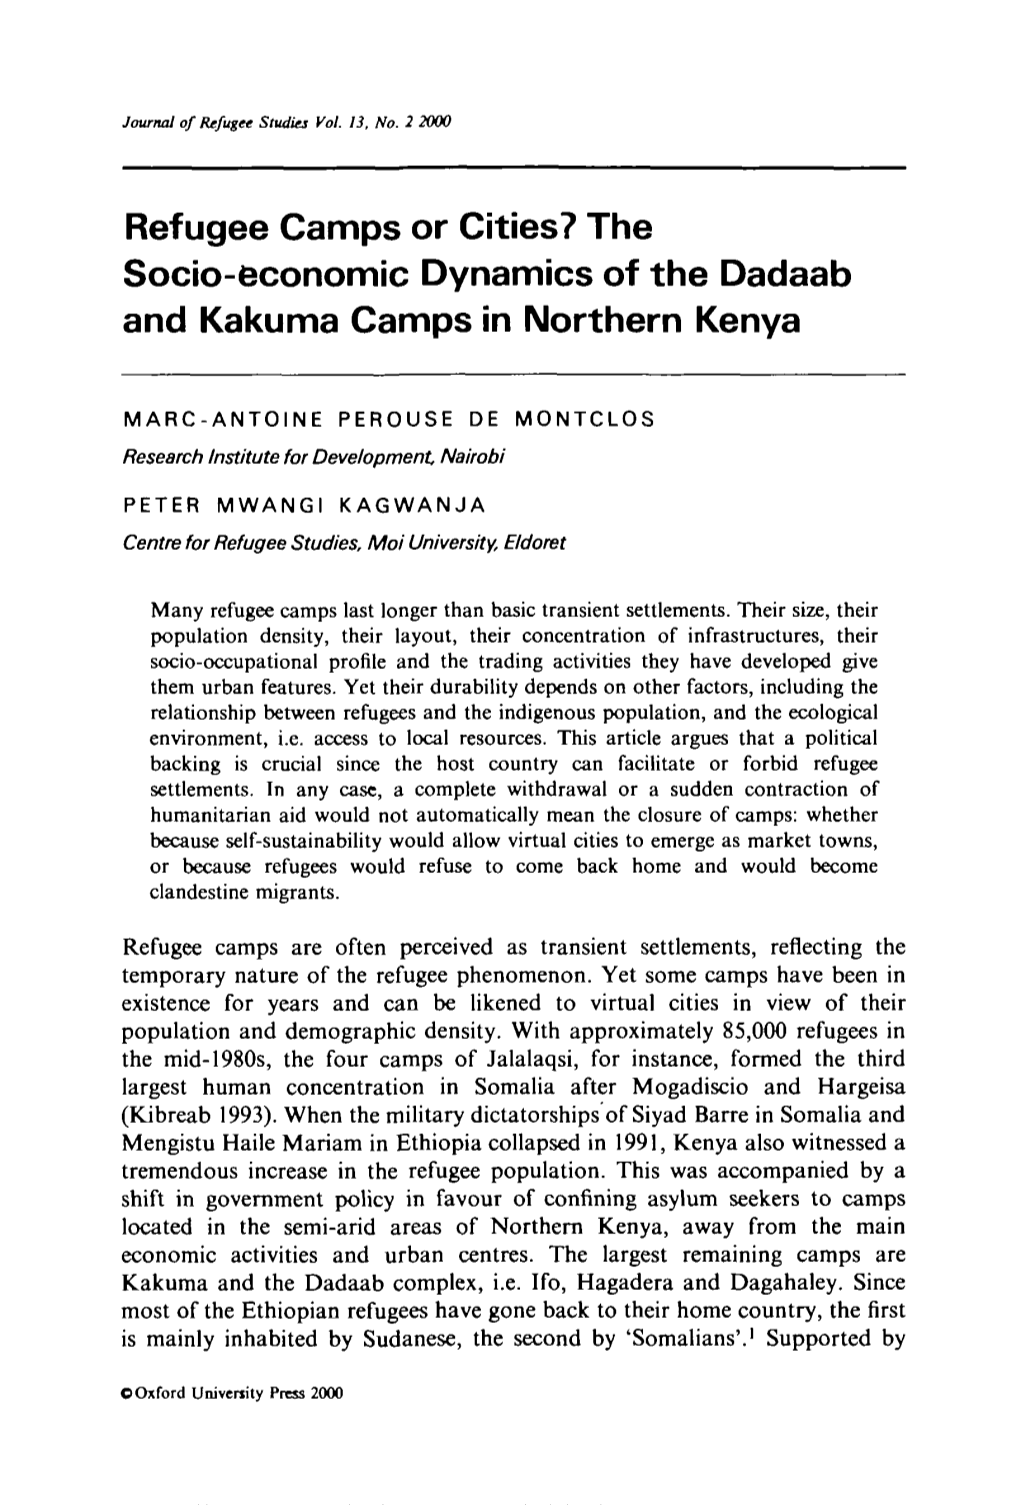 Refugee Camps Or Cities? the Socio-Economic Dynamics of the Dadaab and Kakuma Camps in Northern Kenya